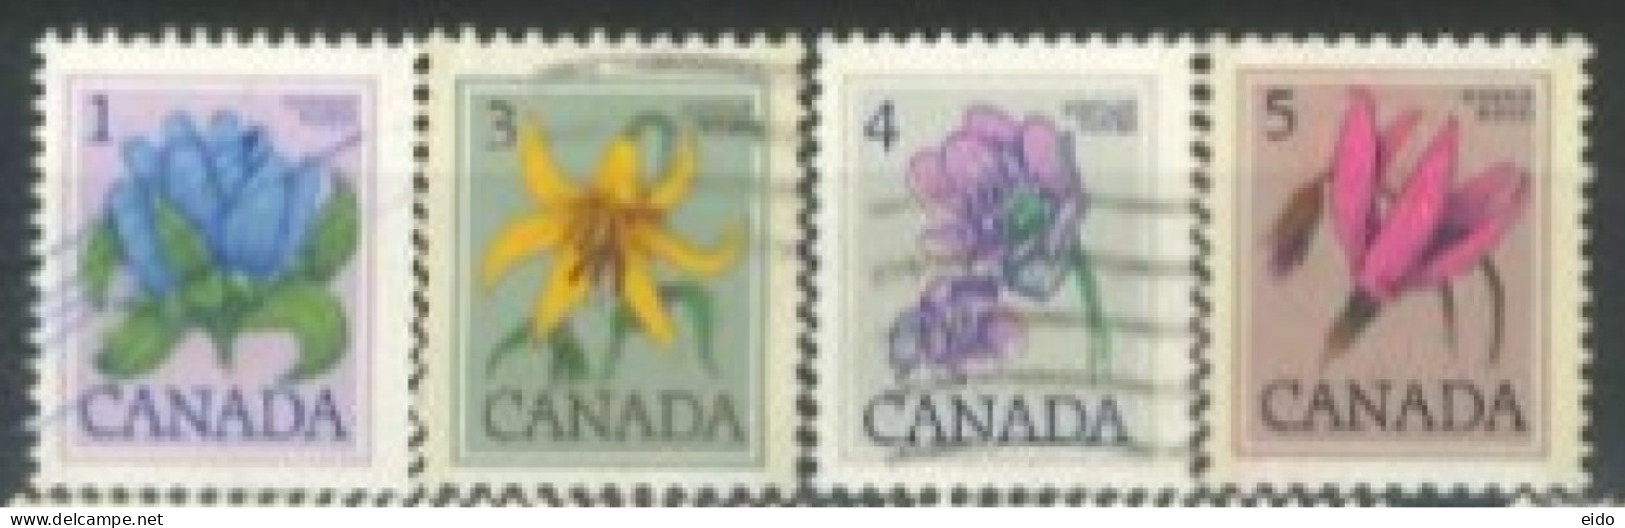 CANADA - 1977, FLOWERS STAMPS SET OF 4, USED. - Gebraucht